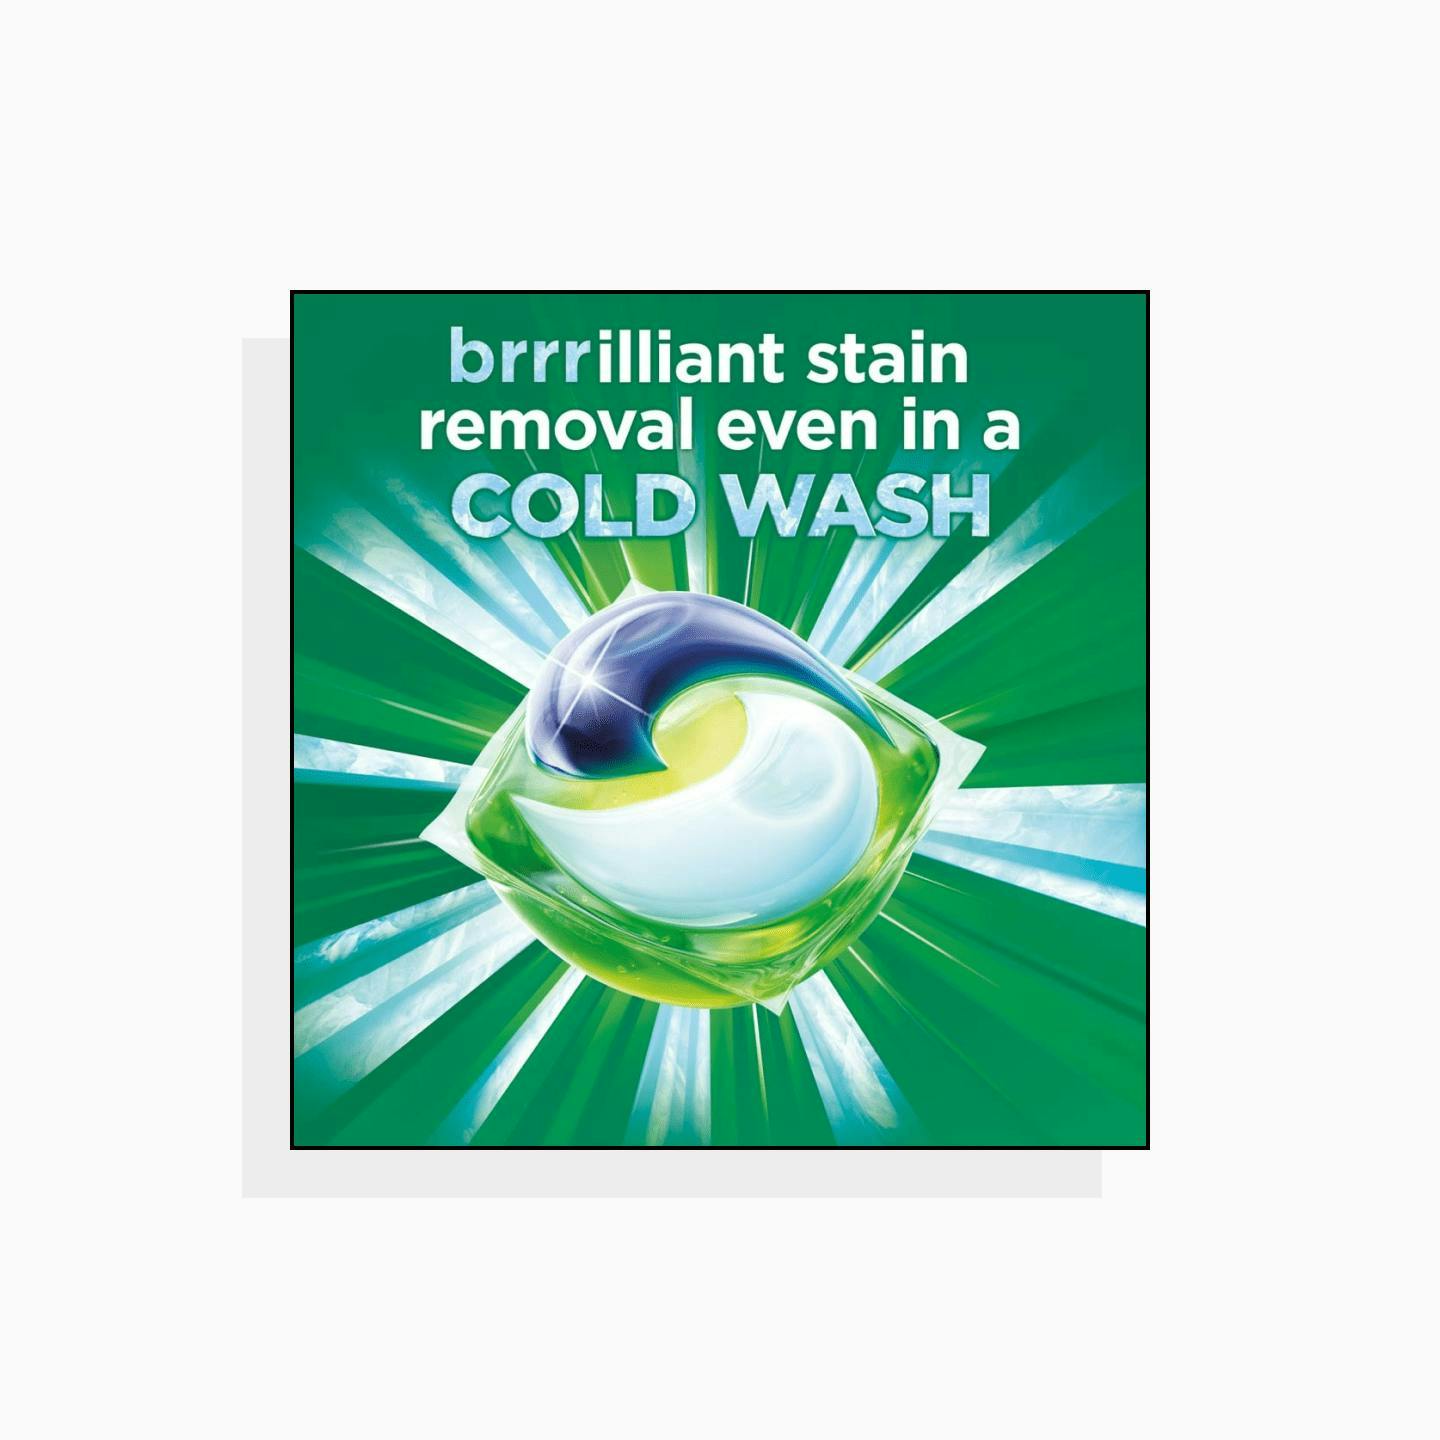 Ariel ad reading 'brrilliant stain removal even in a cold wash'